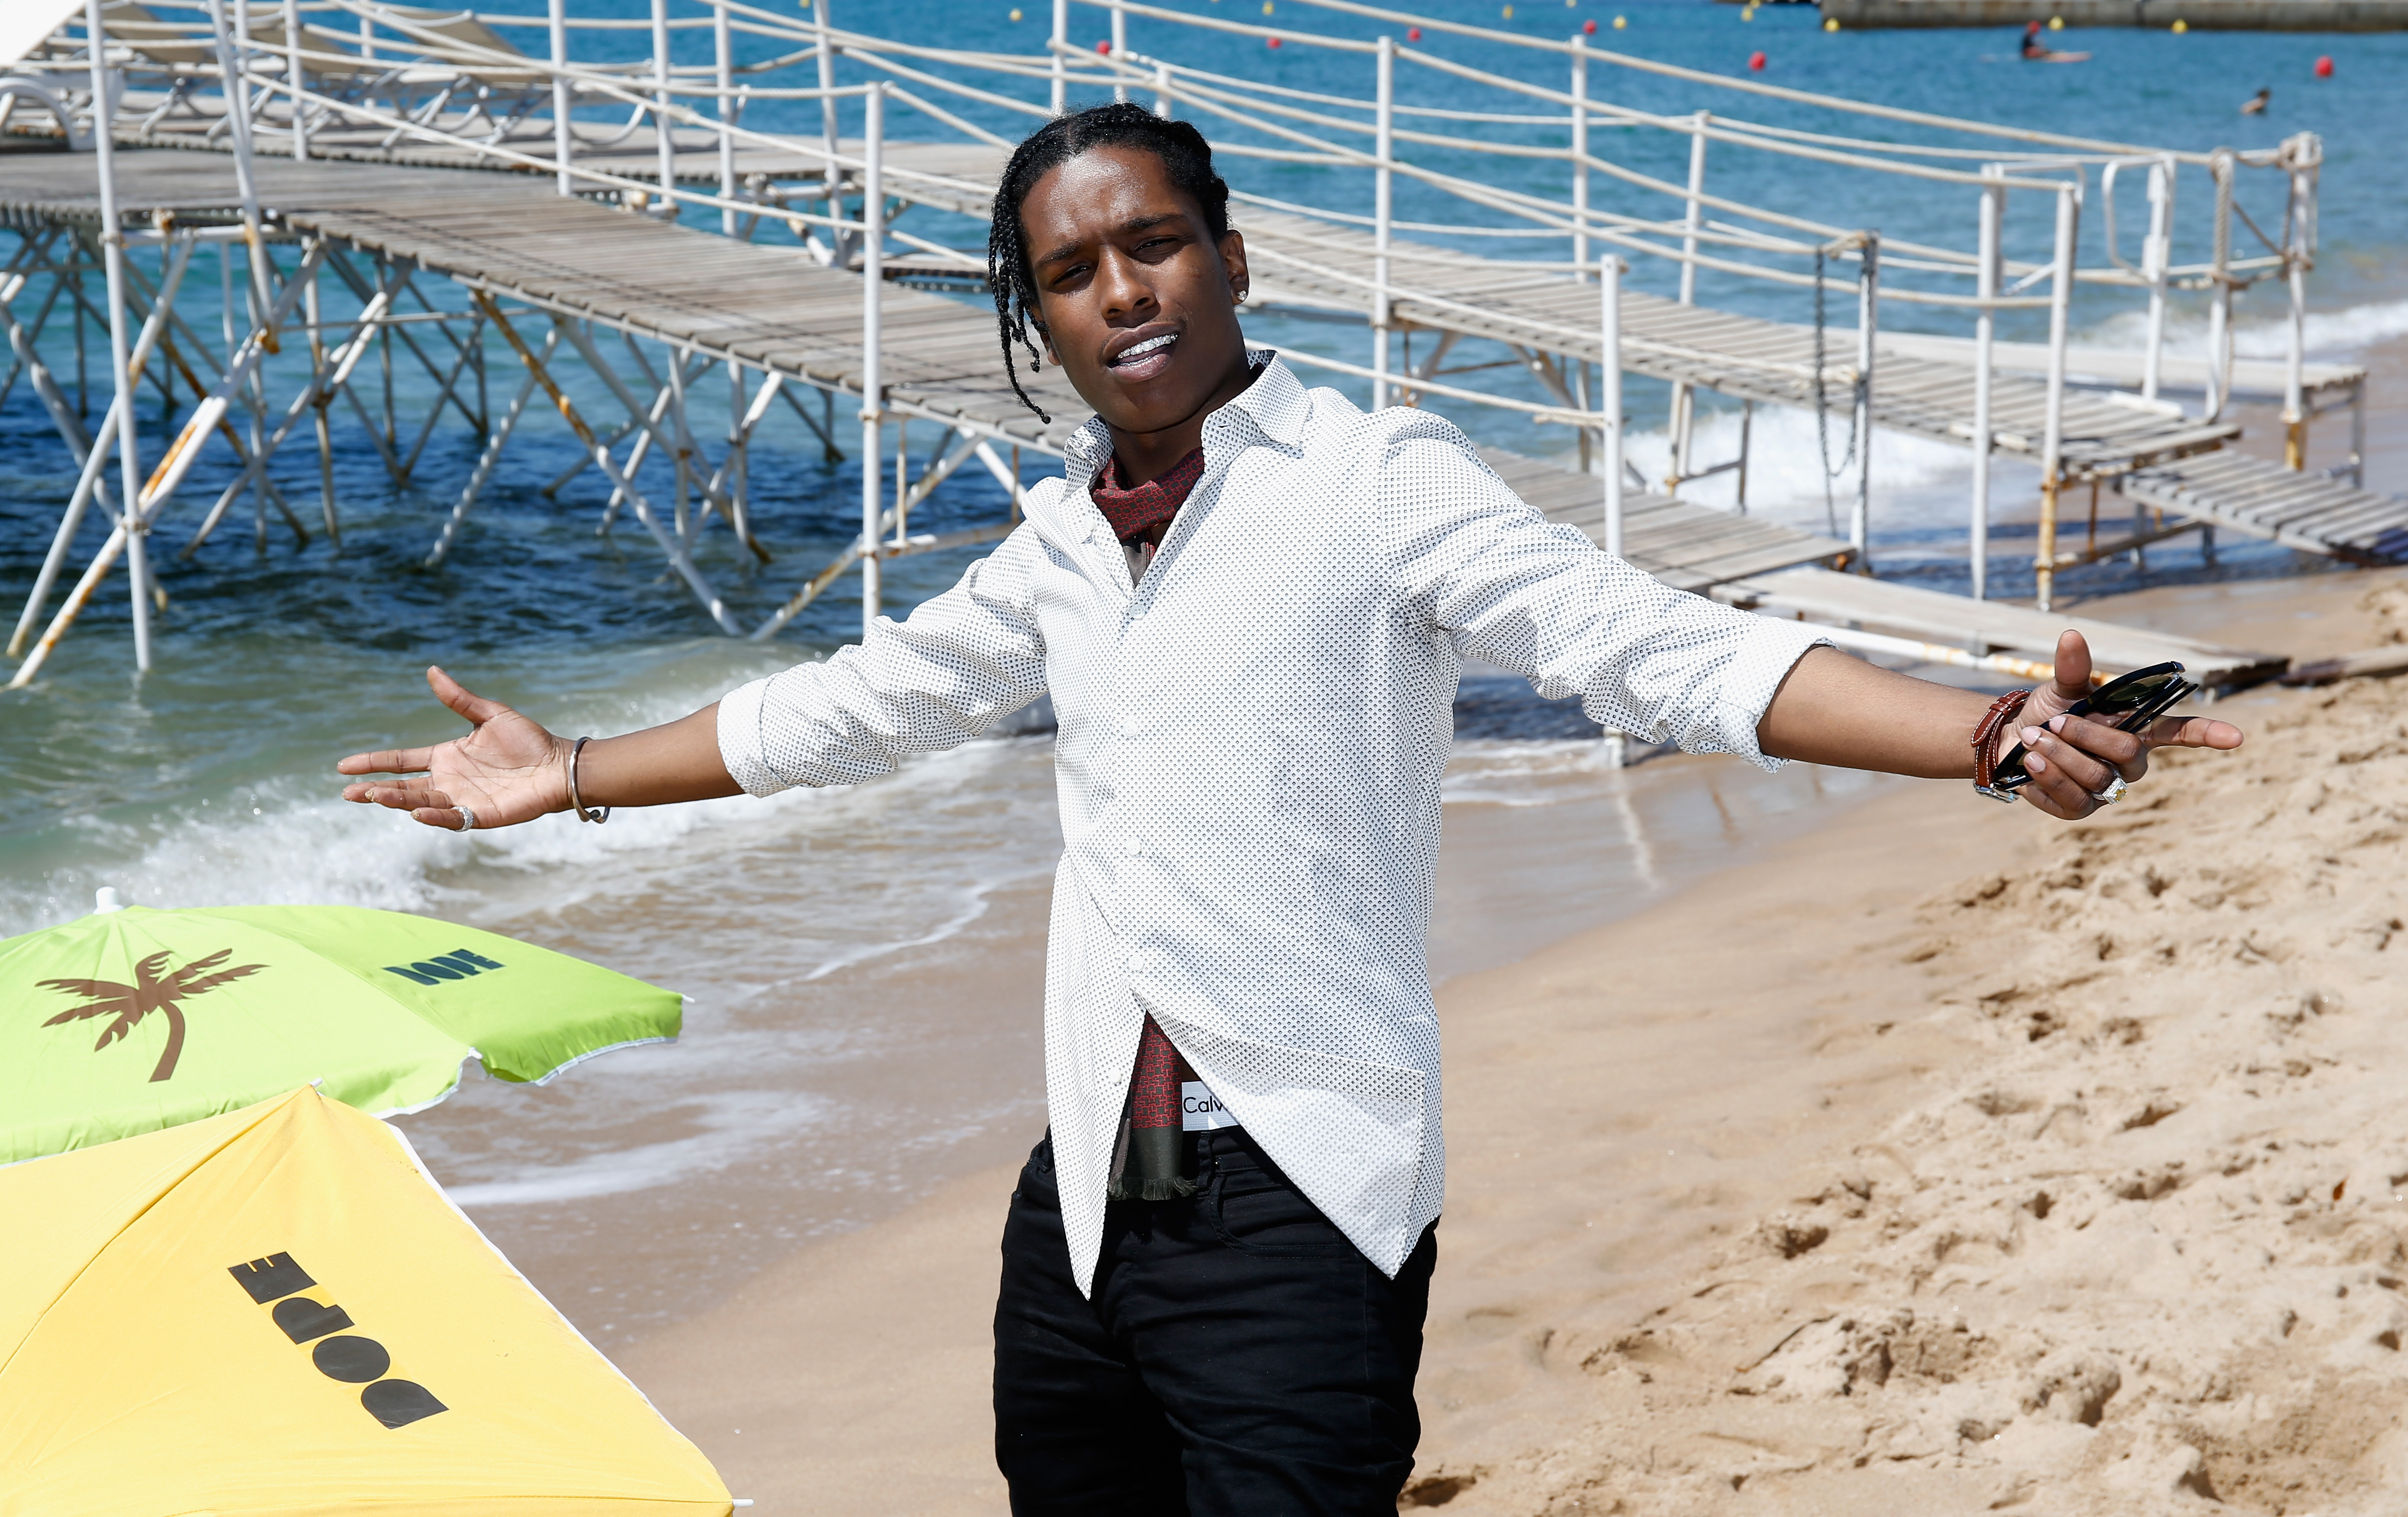 CANNES, FRANCE - MAY 22:  Rapper ASAP Rocky attends a photocall for "Dope" during the 68th annual Cannes Film Festival on May 22, 2015 in Cannes, France.  (Photo by Alex B. Huckle/Getty Images)